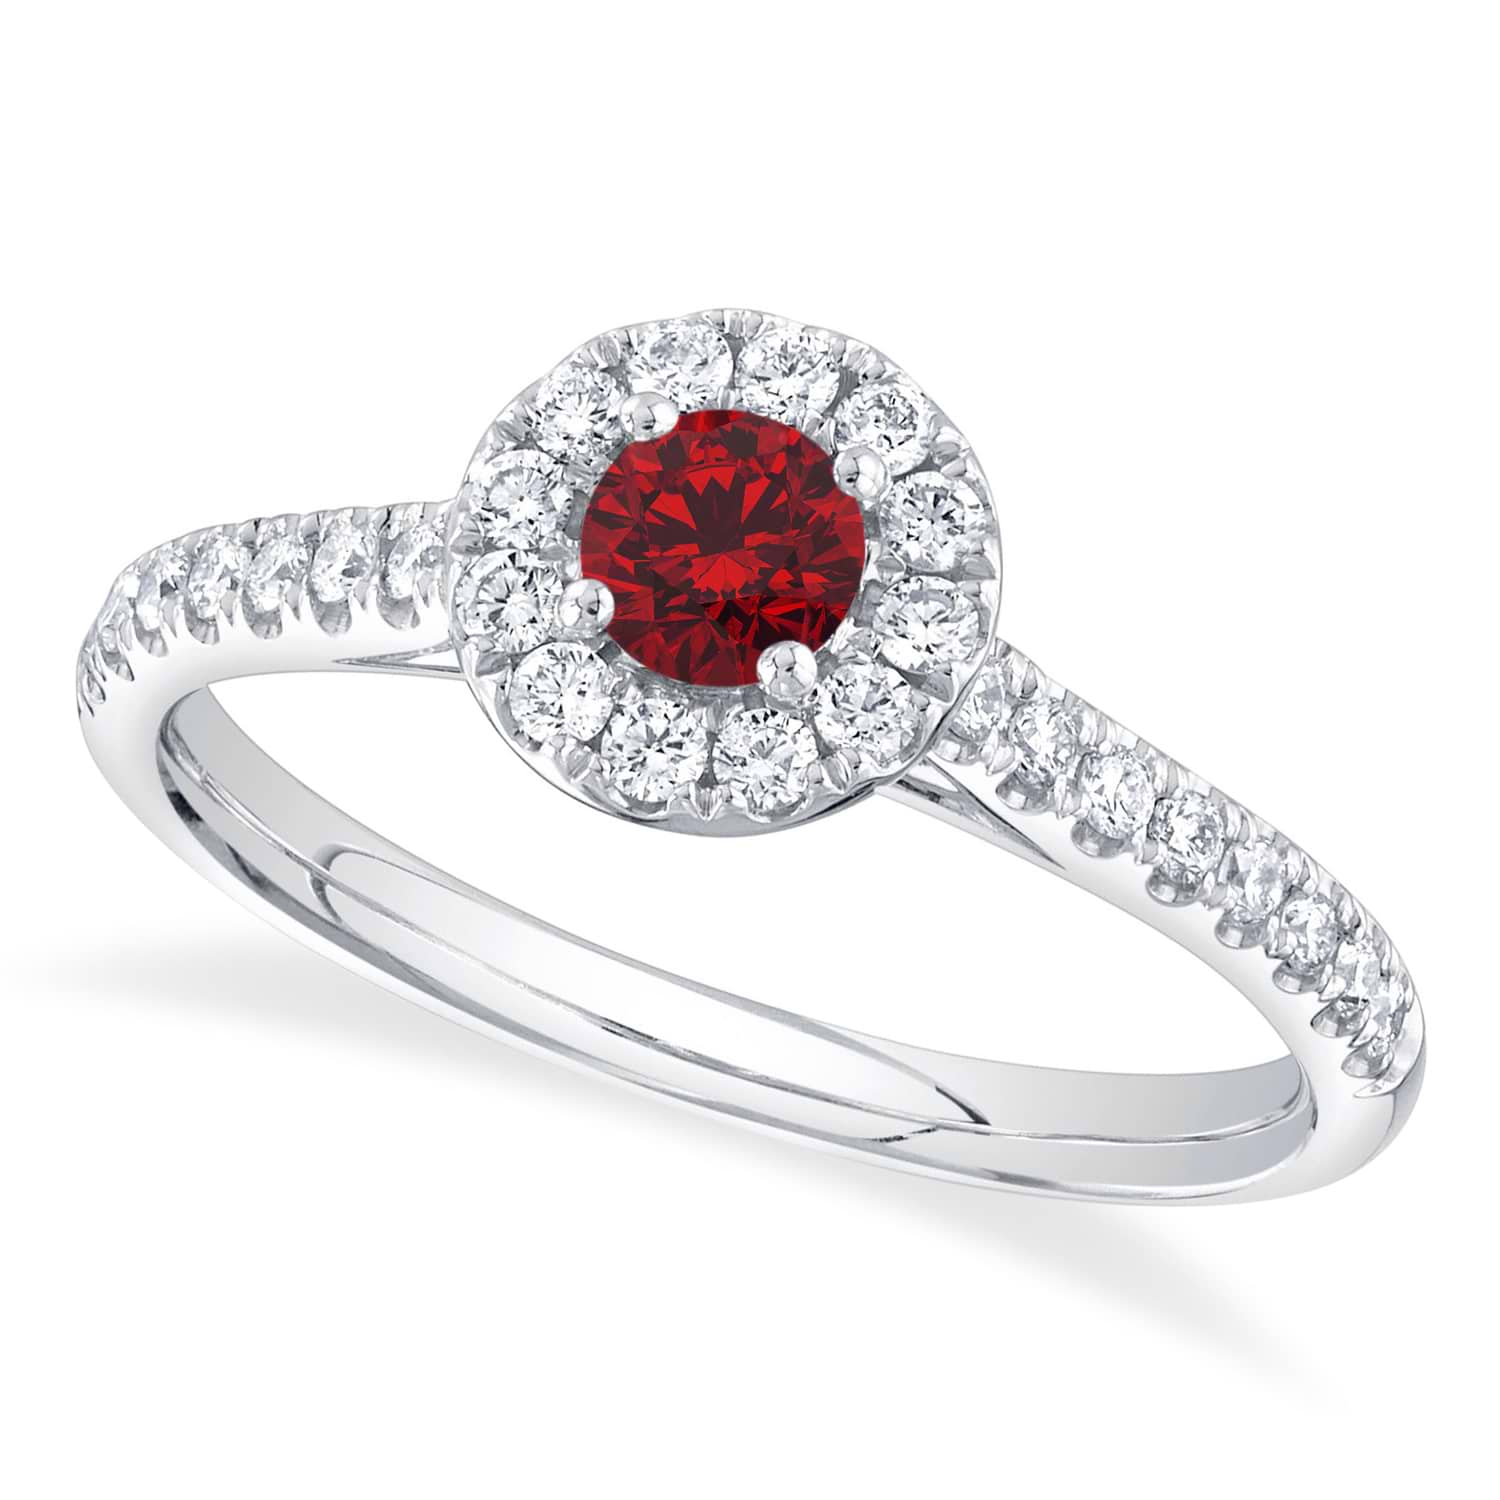 Round Ruby Solitaire & Diamond Engagement Ring 14K White Gold (0.67ct)